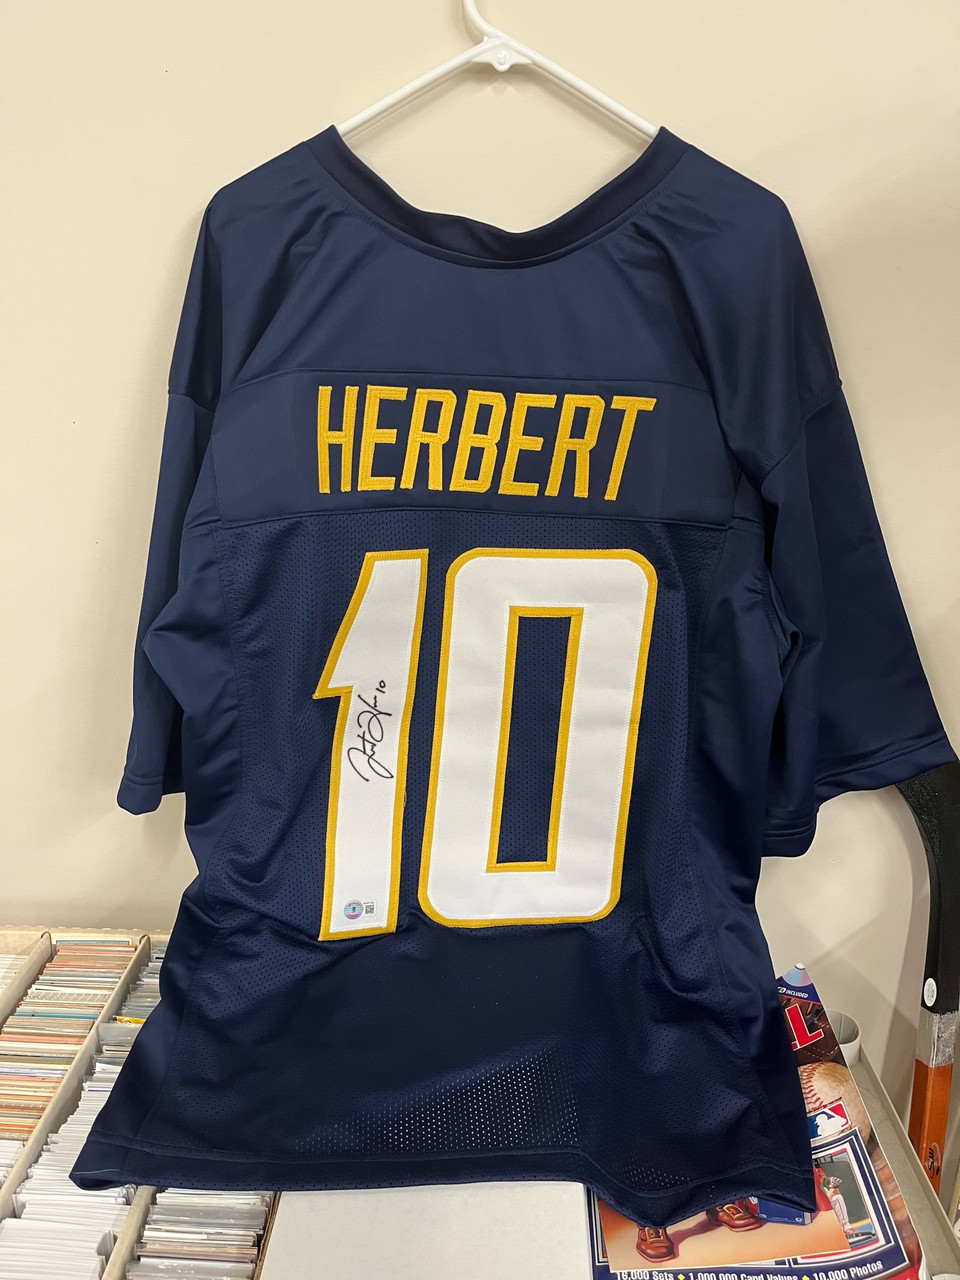 NFL Justin Herbert Signed Jerseys, Collectible Justin Herbert Signed Jerseys